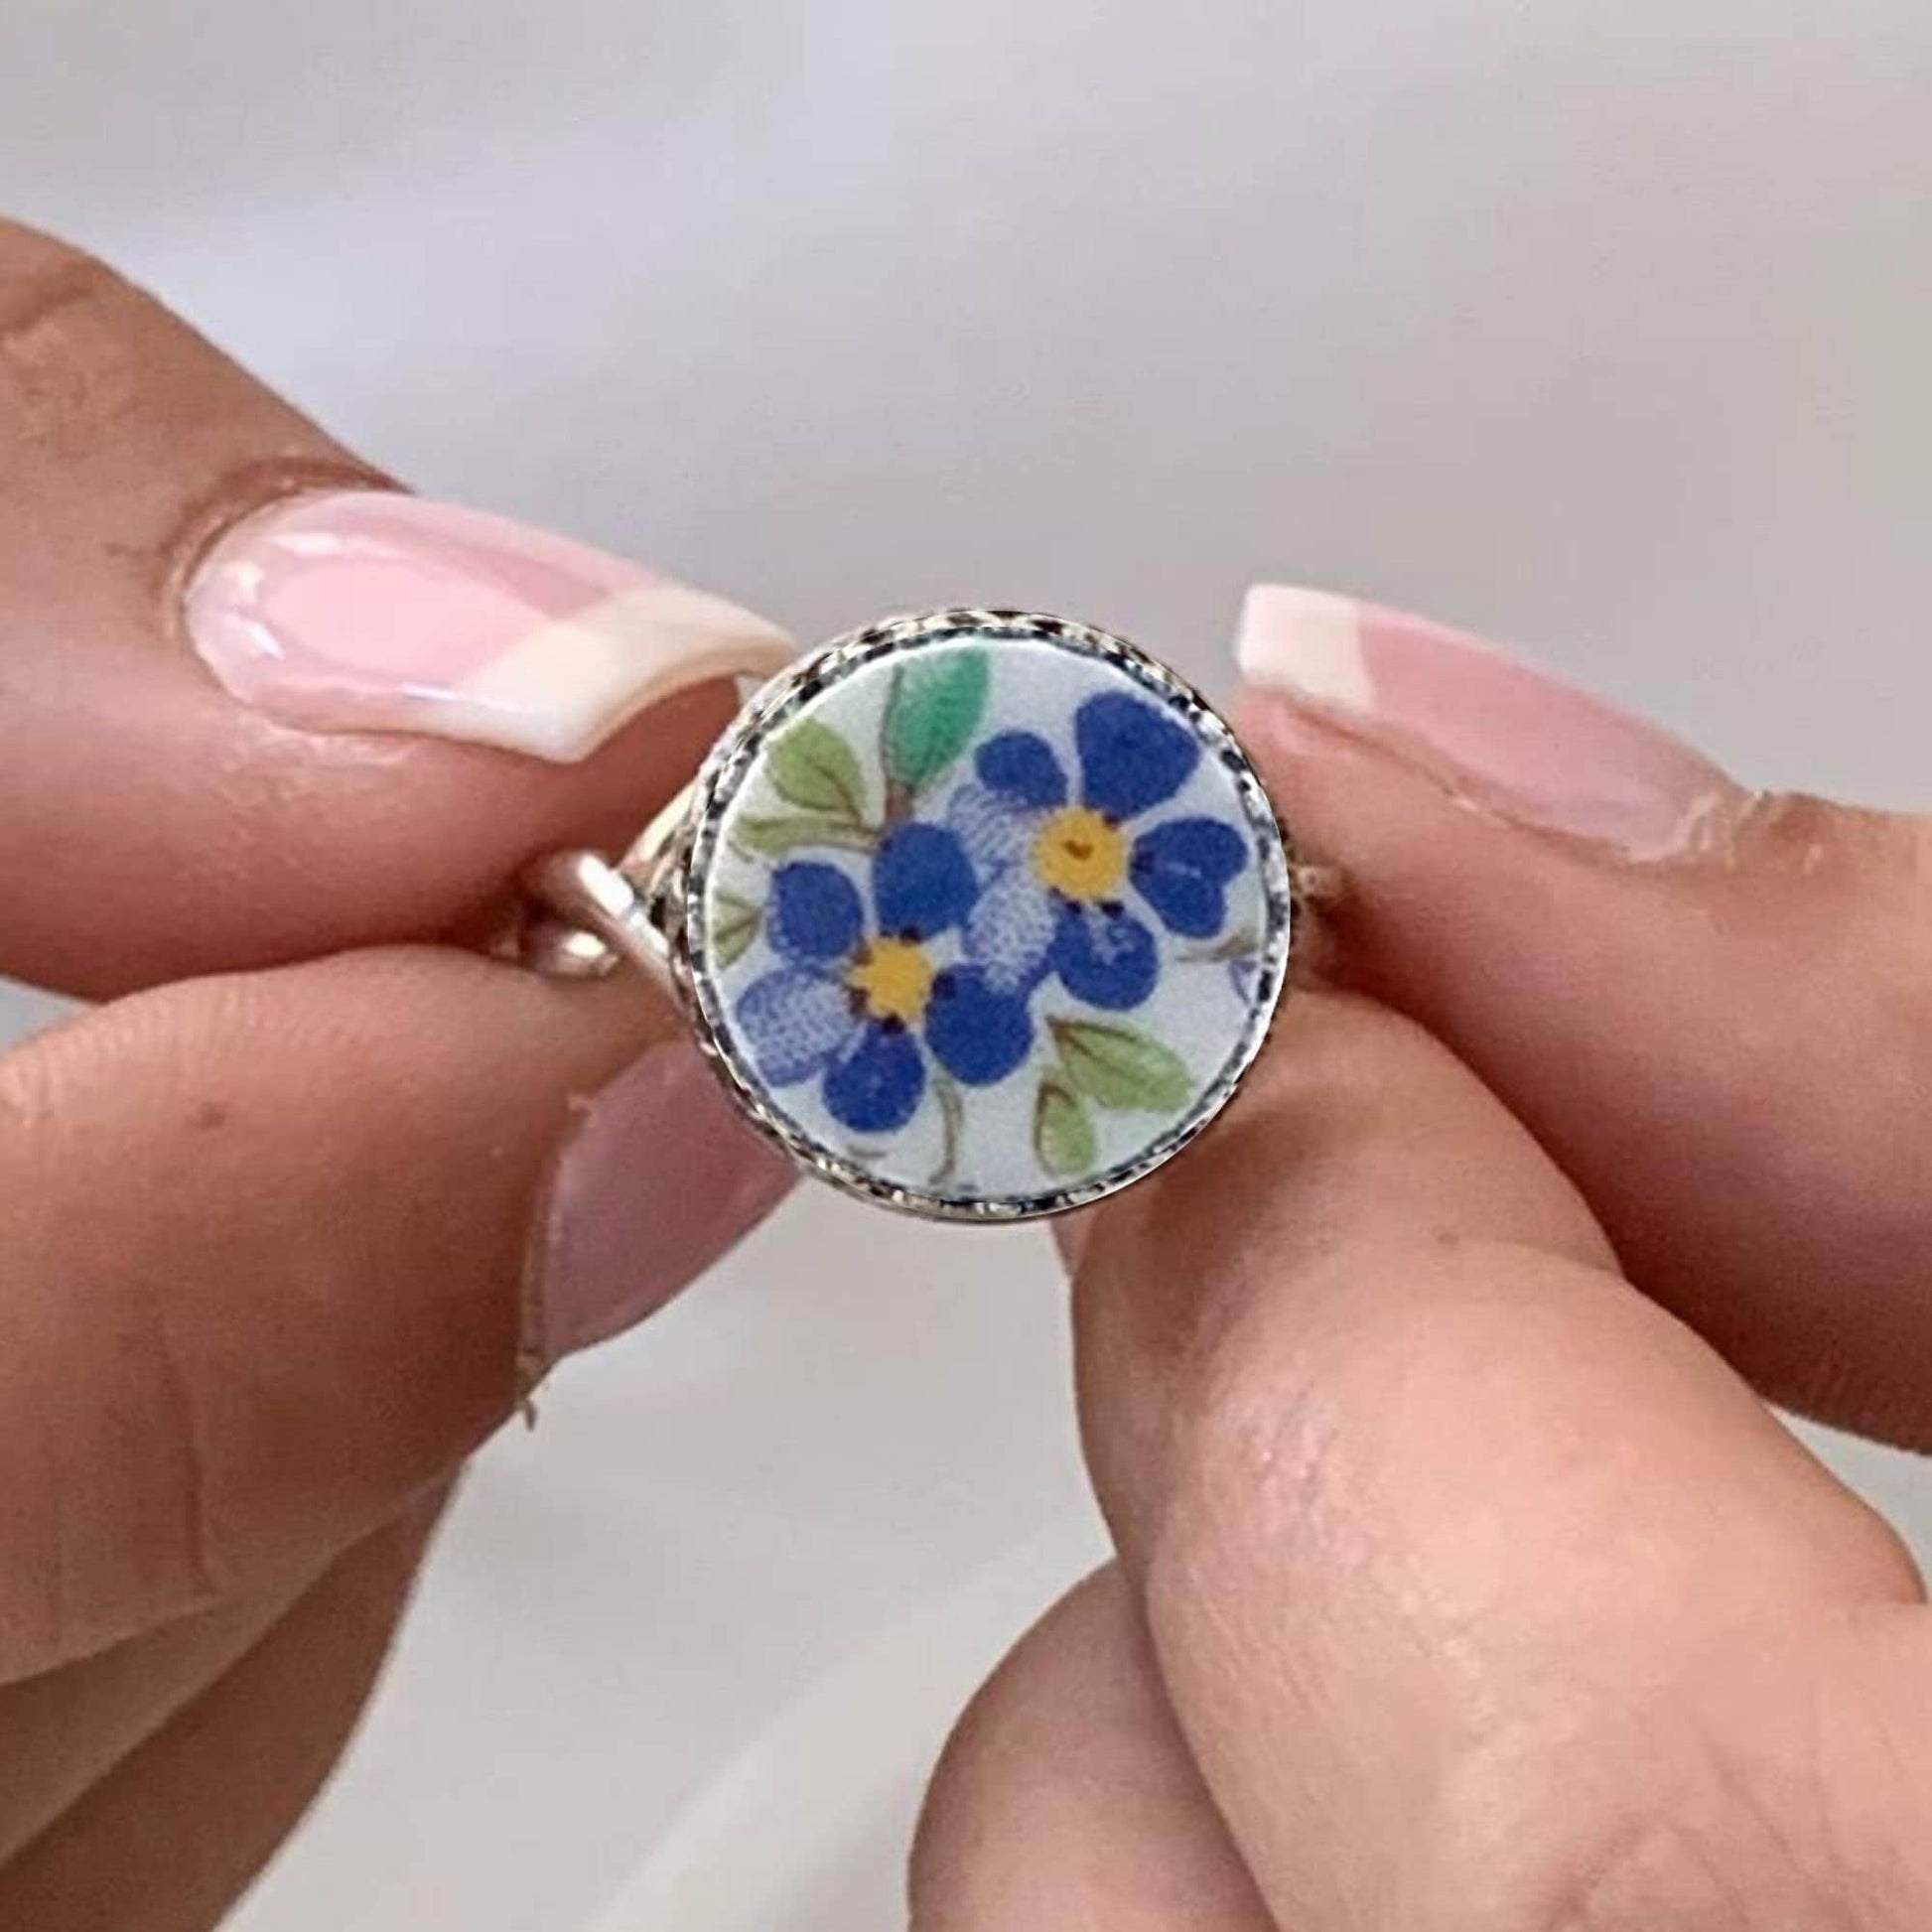 Adjustable Silver Flower Ring, Forget Me Not Broken China Jewelry, Unique Gifts for Women